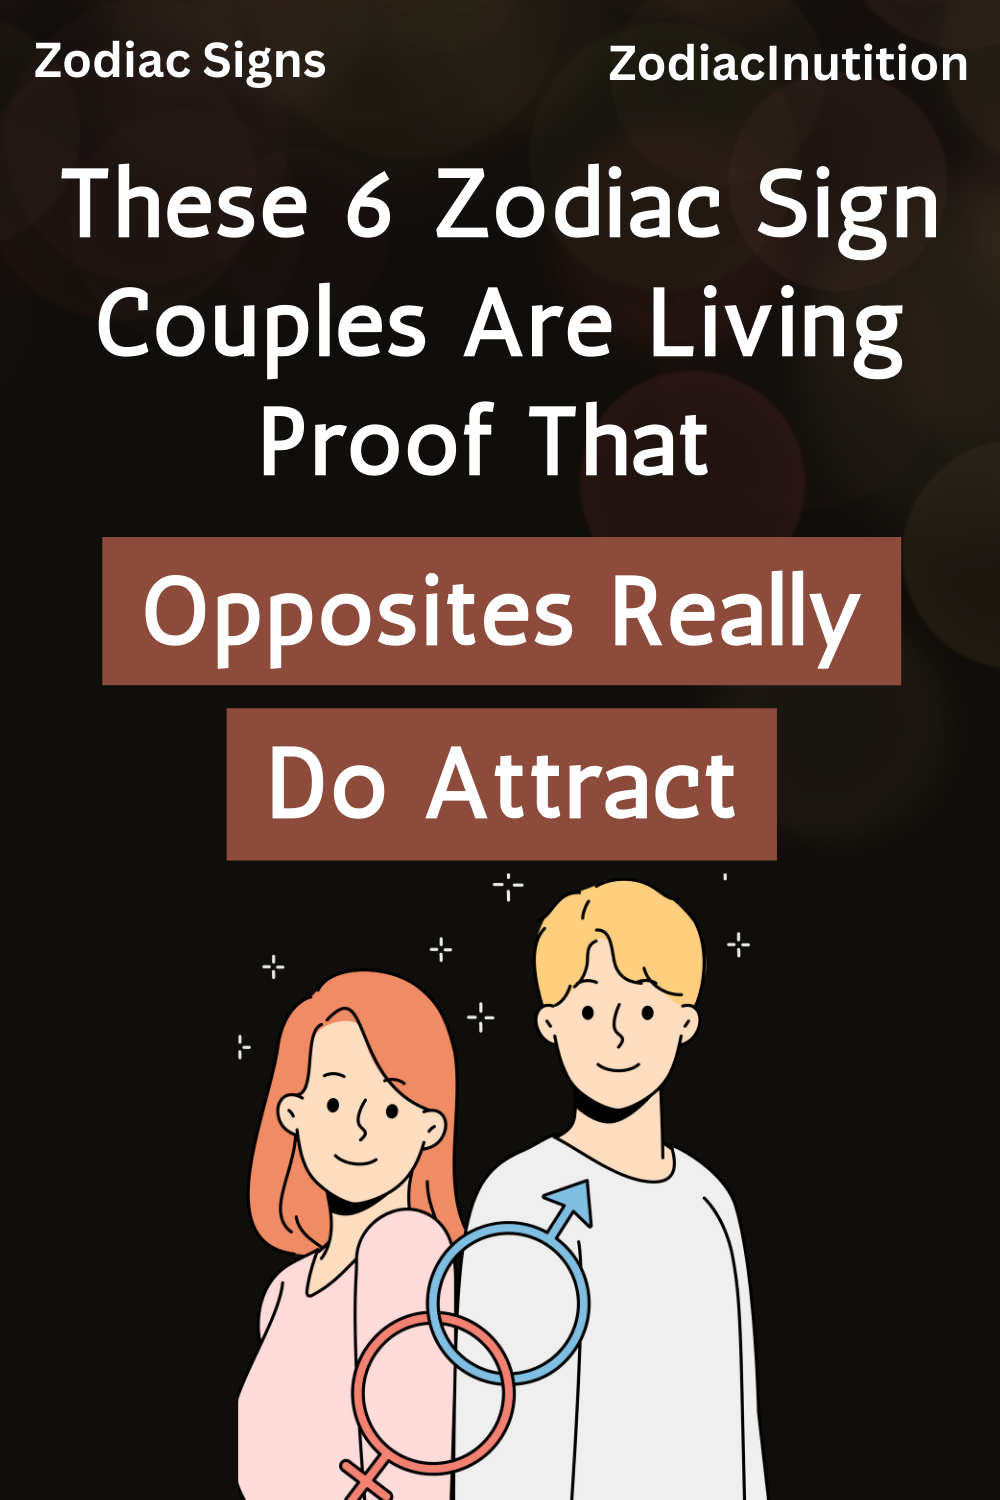 These 6 Zodiac Sign Couples Are Living Proof That Opposites Really Do Attract